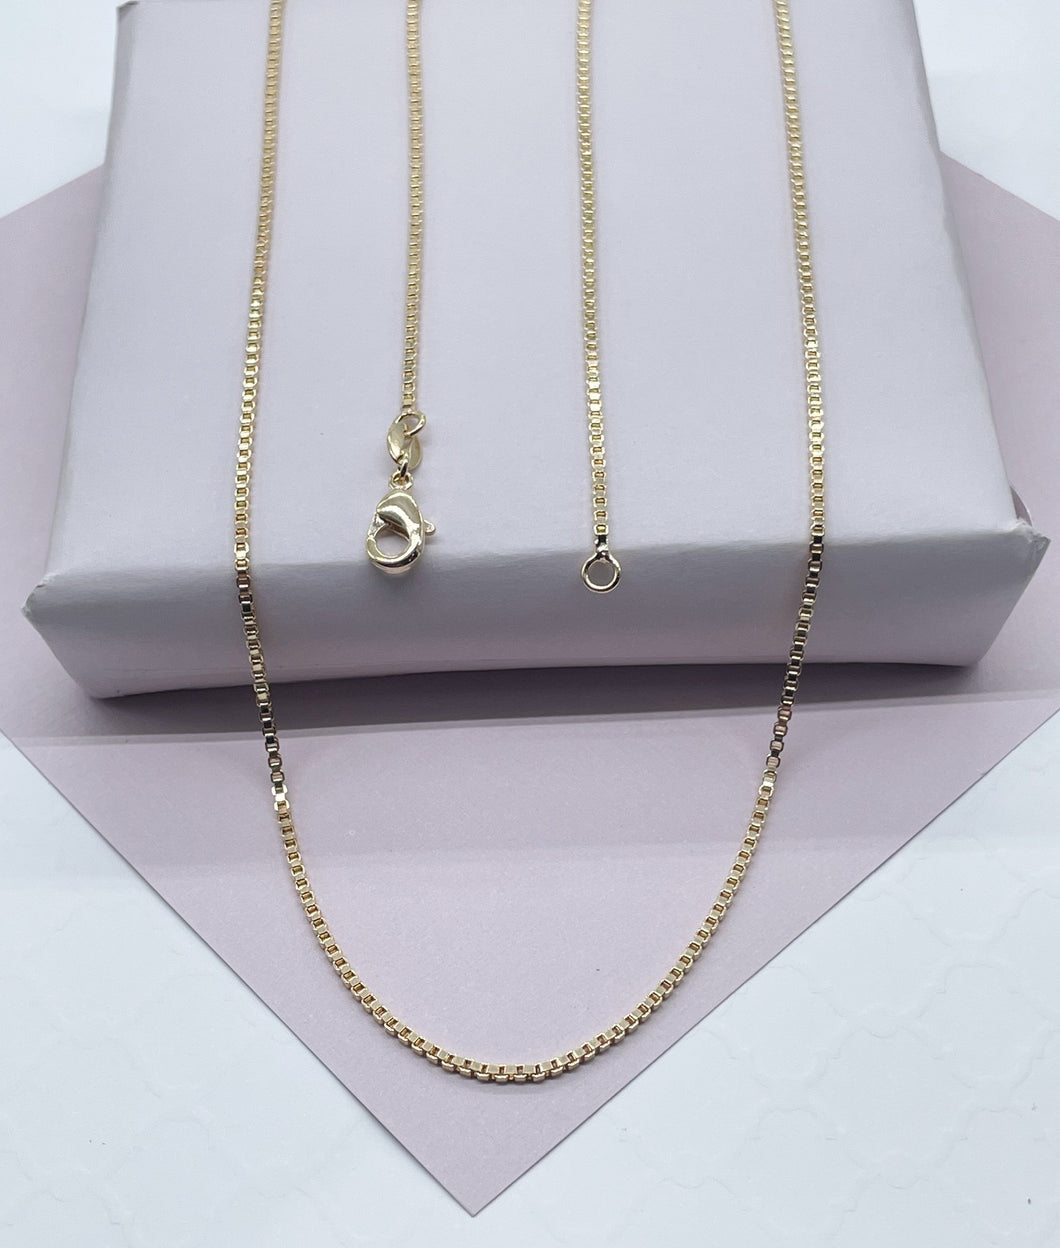 18k Gold Filled 1.5mm Thickness Box Chain, Available In 16” & 18” For